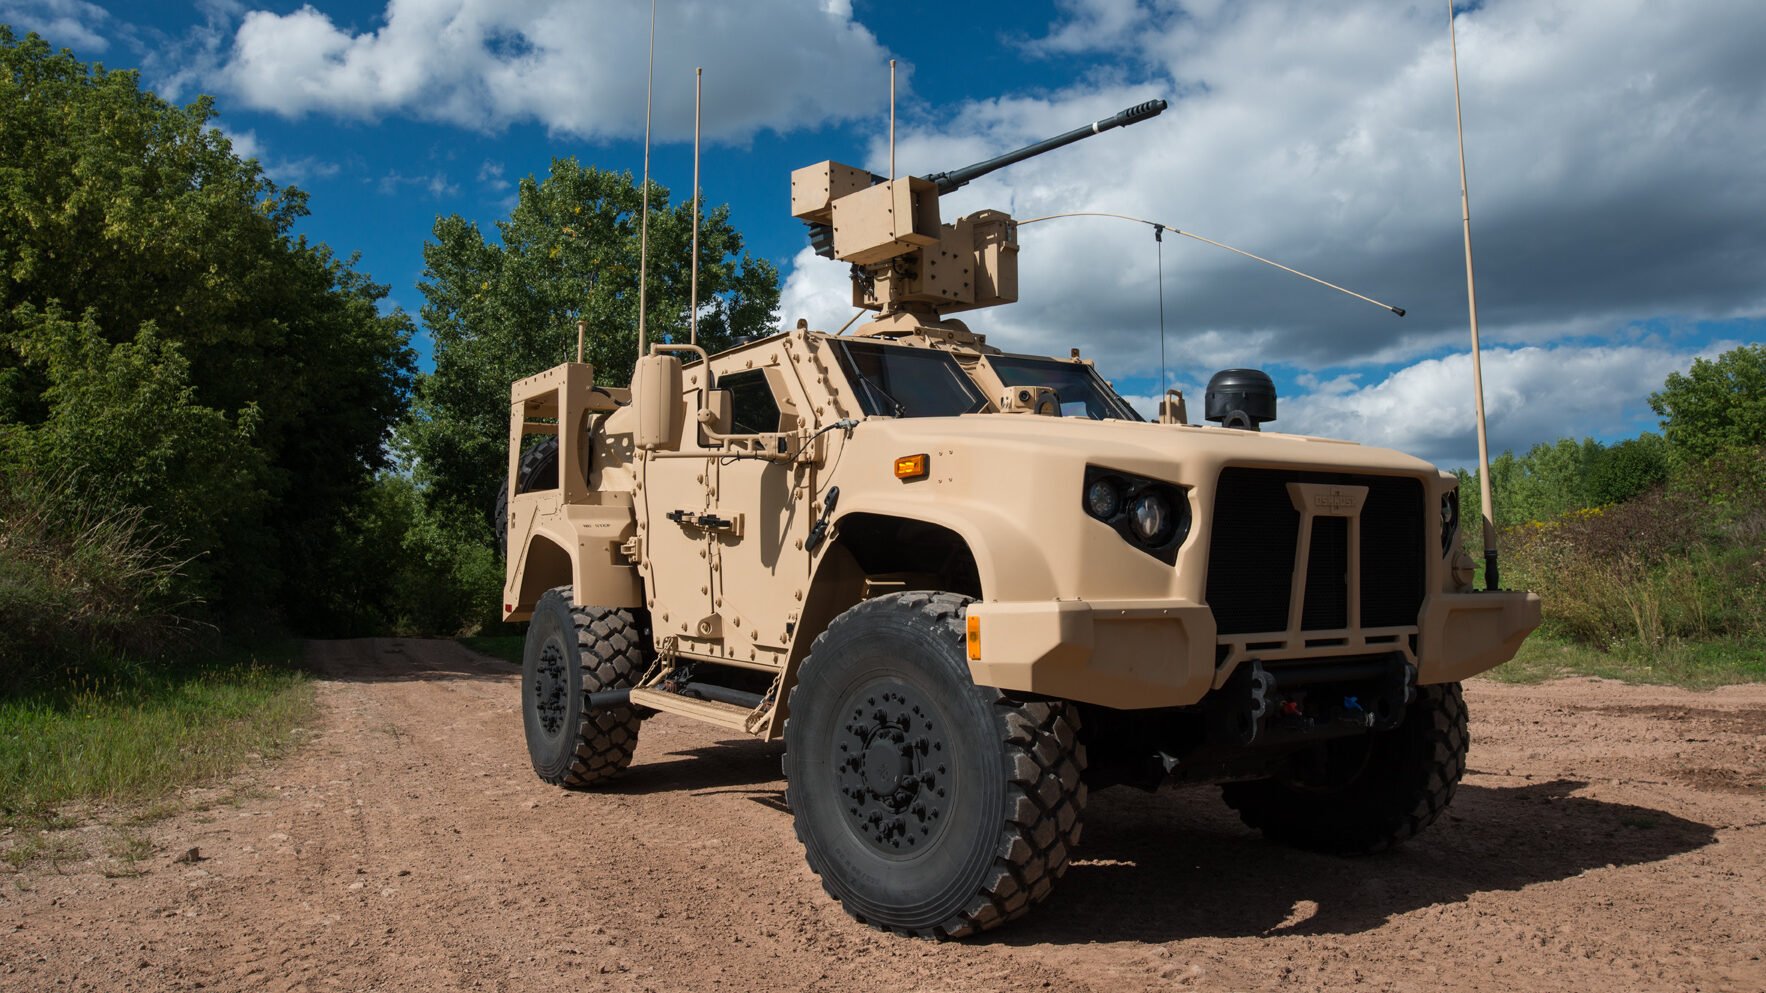 Oshkosh Defense to build another 1,600 JLTVs for the Army